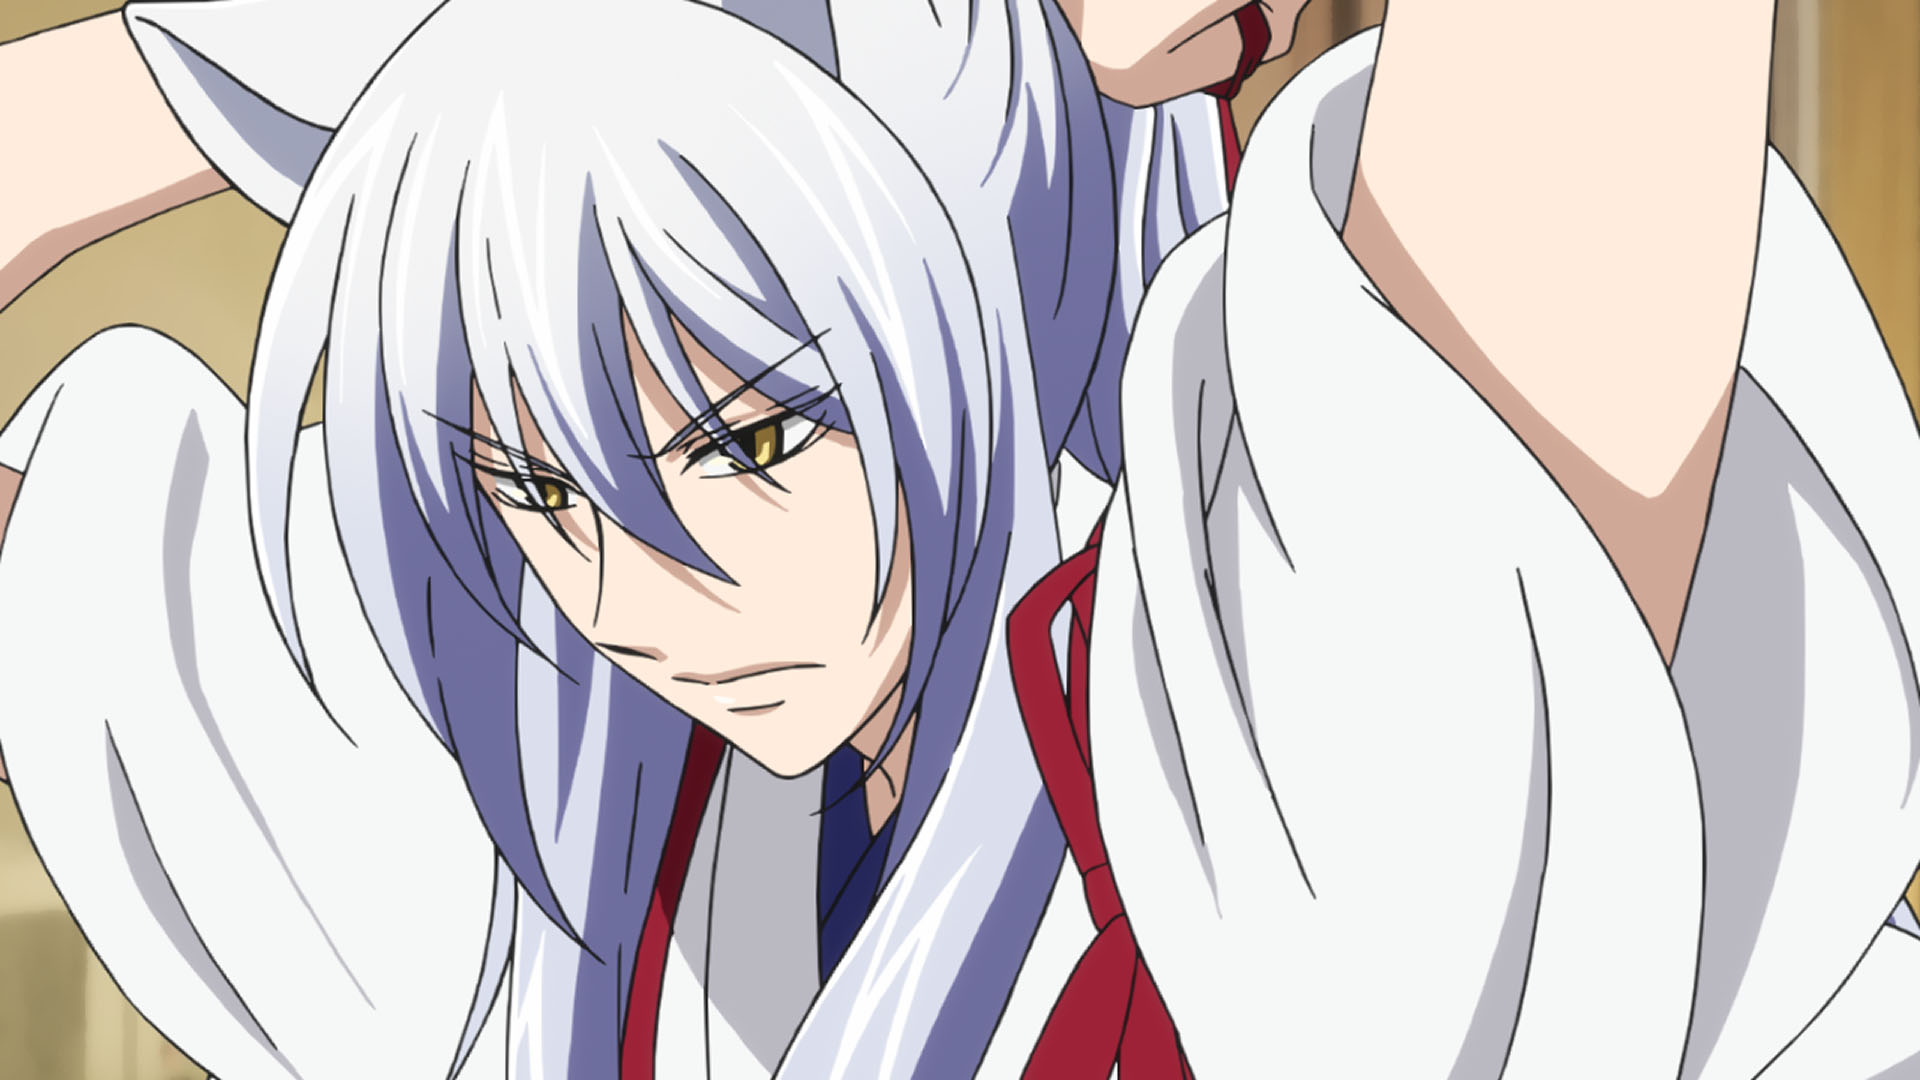 10. "Anime characters with white hair and blue bangs" - wide 2